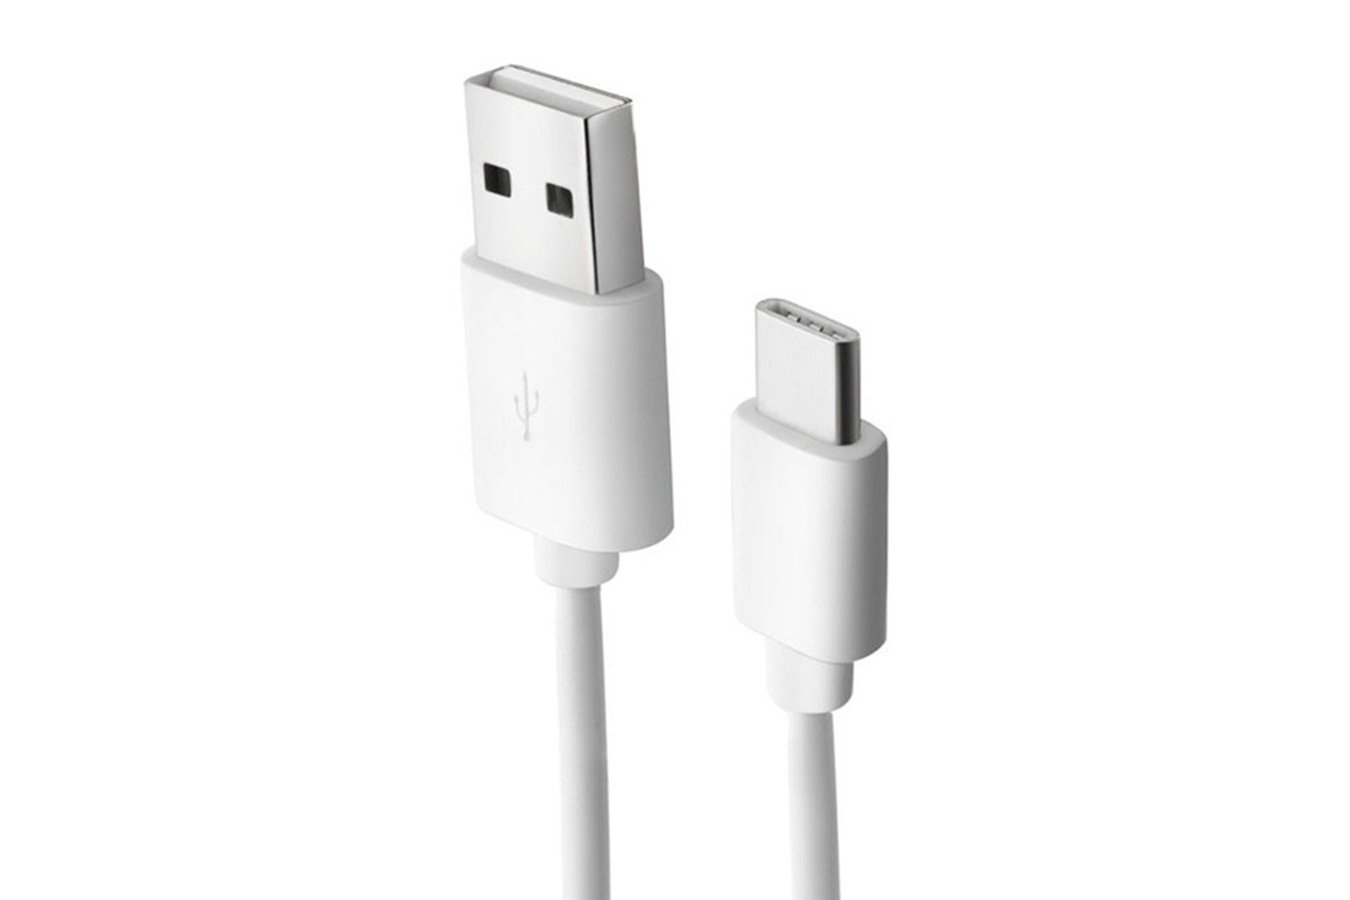 iPhone in the near future may receive a USB Type-C connector instead of Lightning